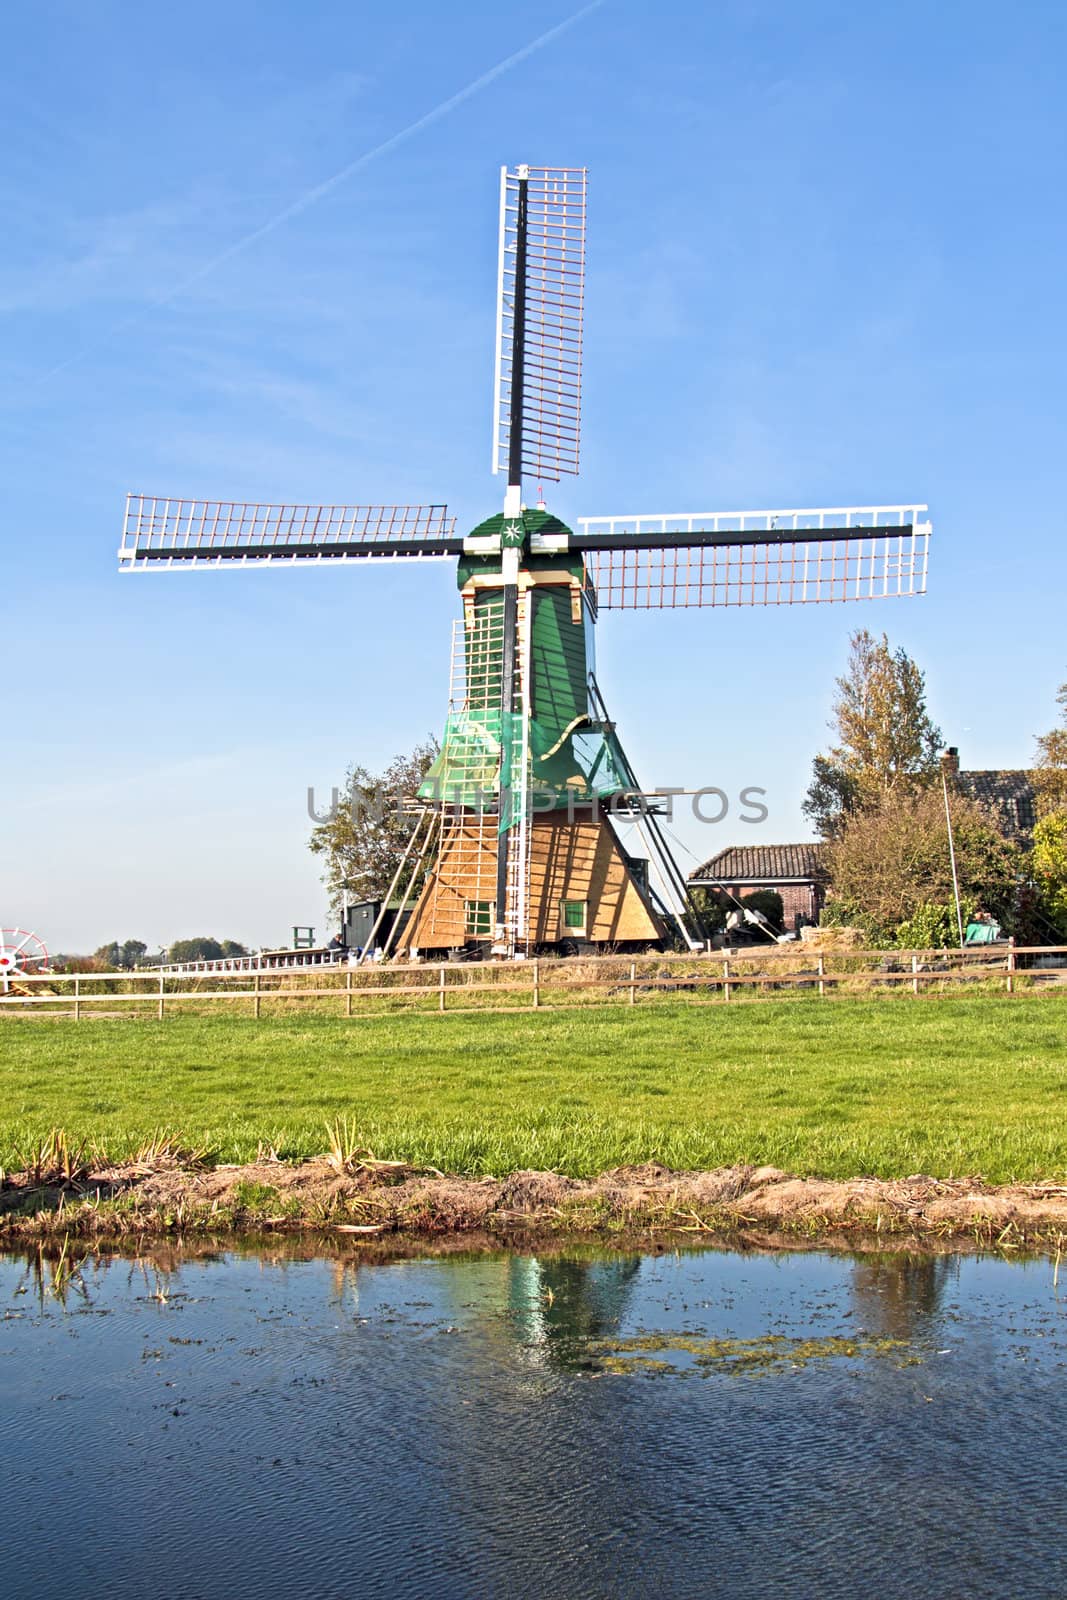 Traditional windmill in the countryside from the Netherlands by devy